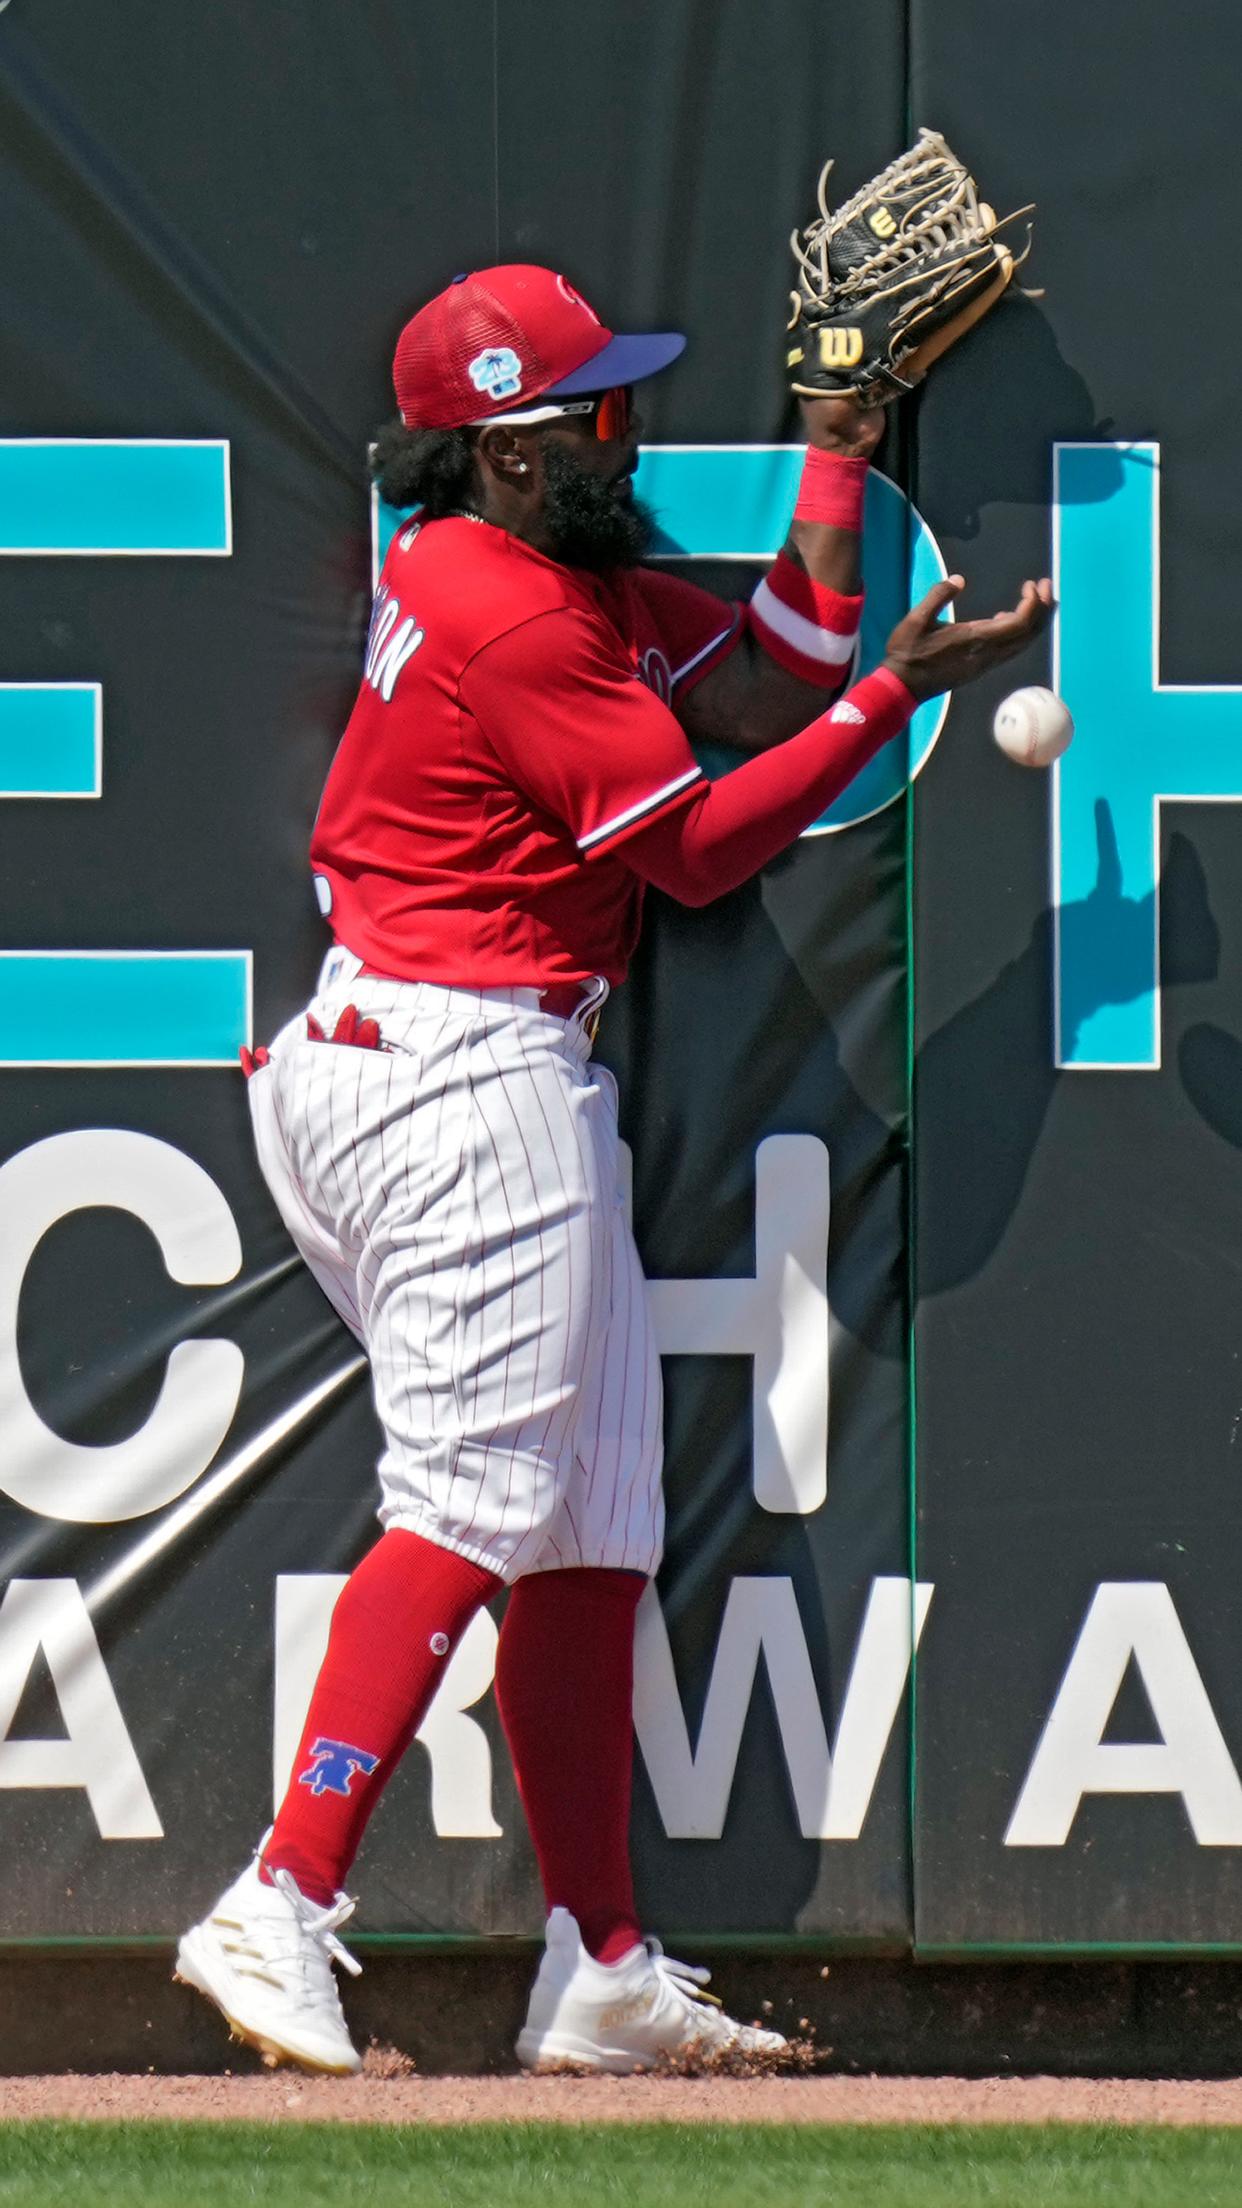 Josh Harrison, who started last season with the Phillies, is proud of his versatility. “Not to toot my own horn, but I’ve done it for a long time, playing a lot of positions,” he said. “It’s not something that I take lightly.”